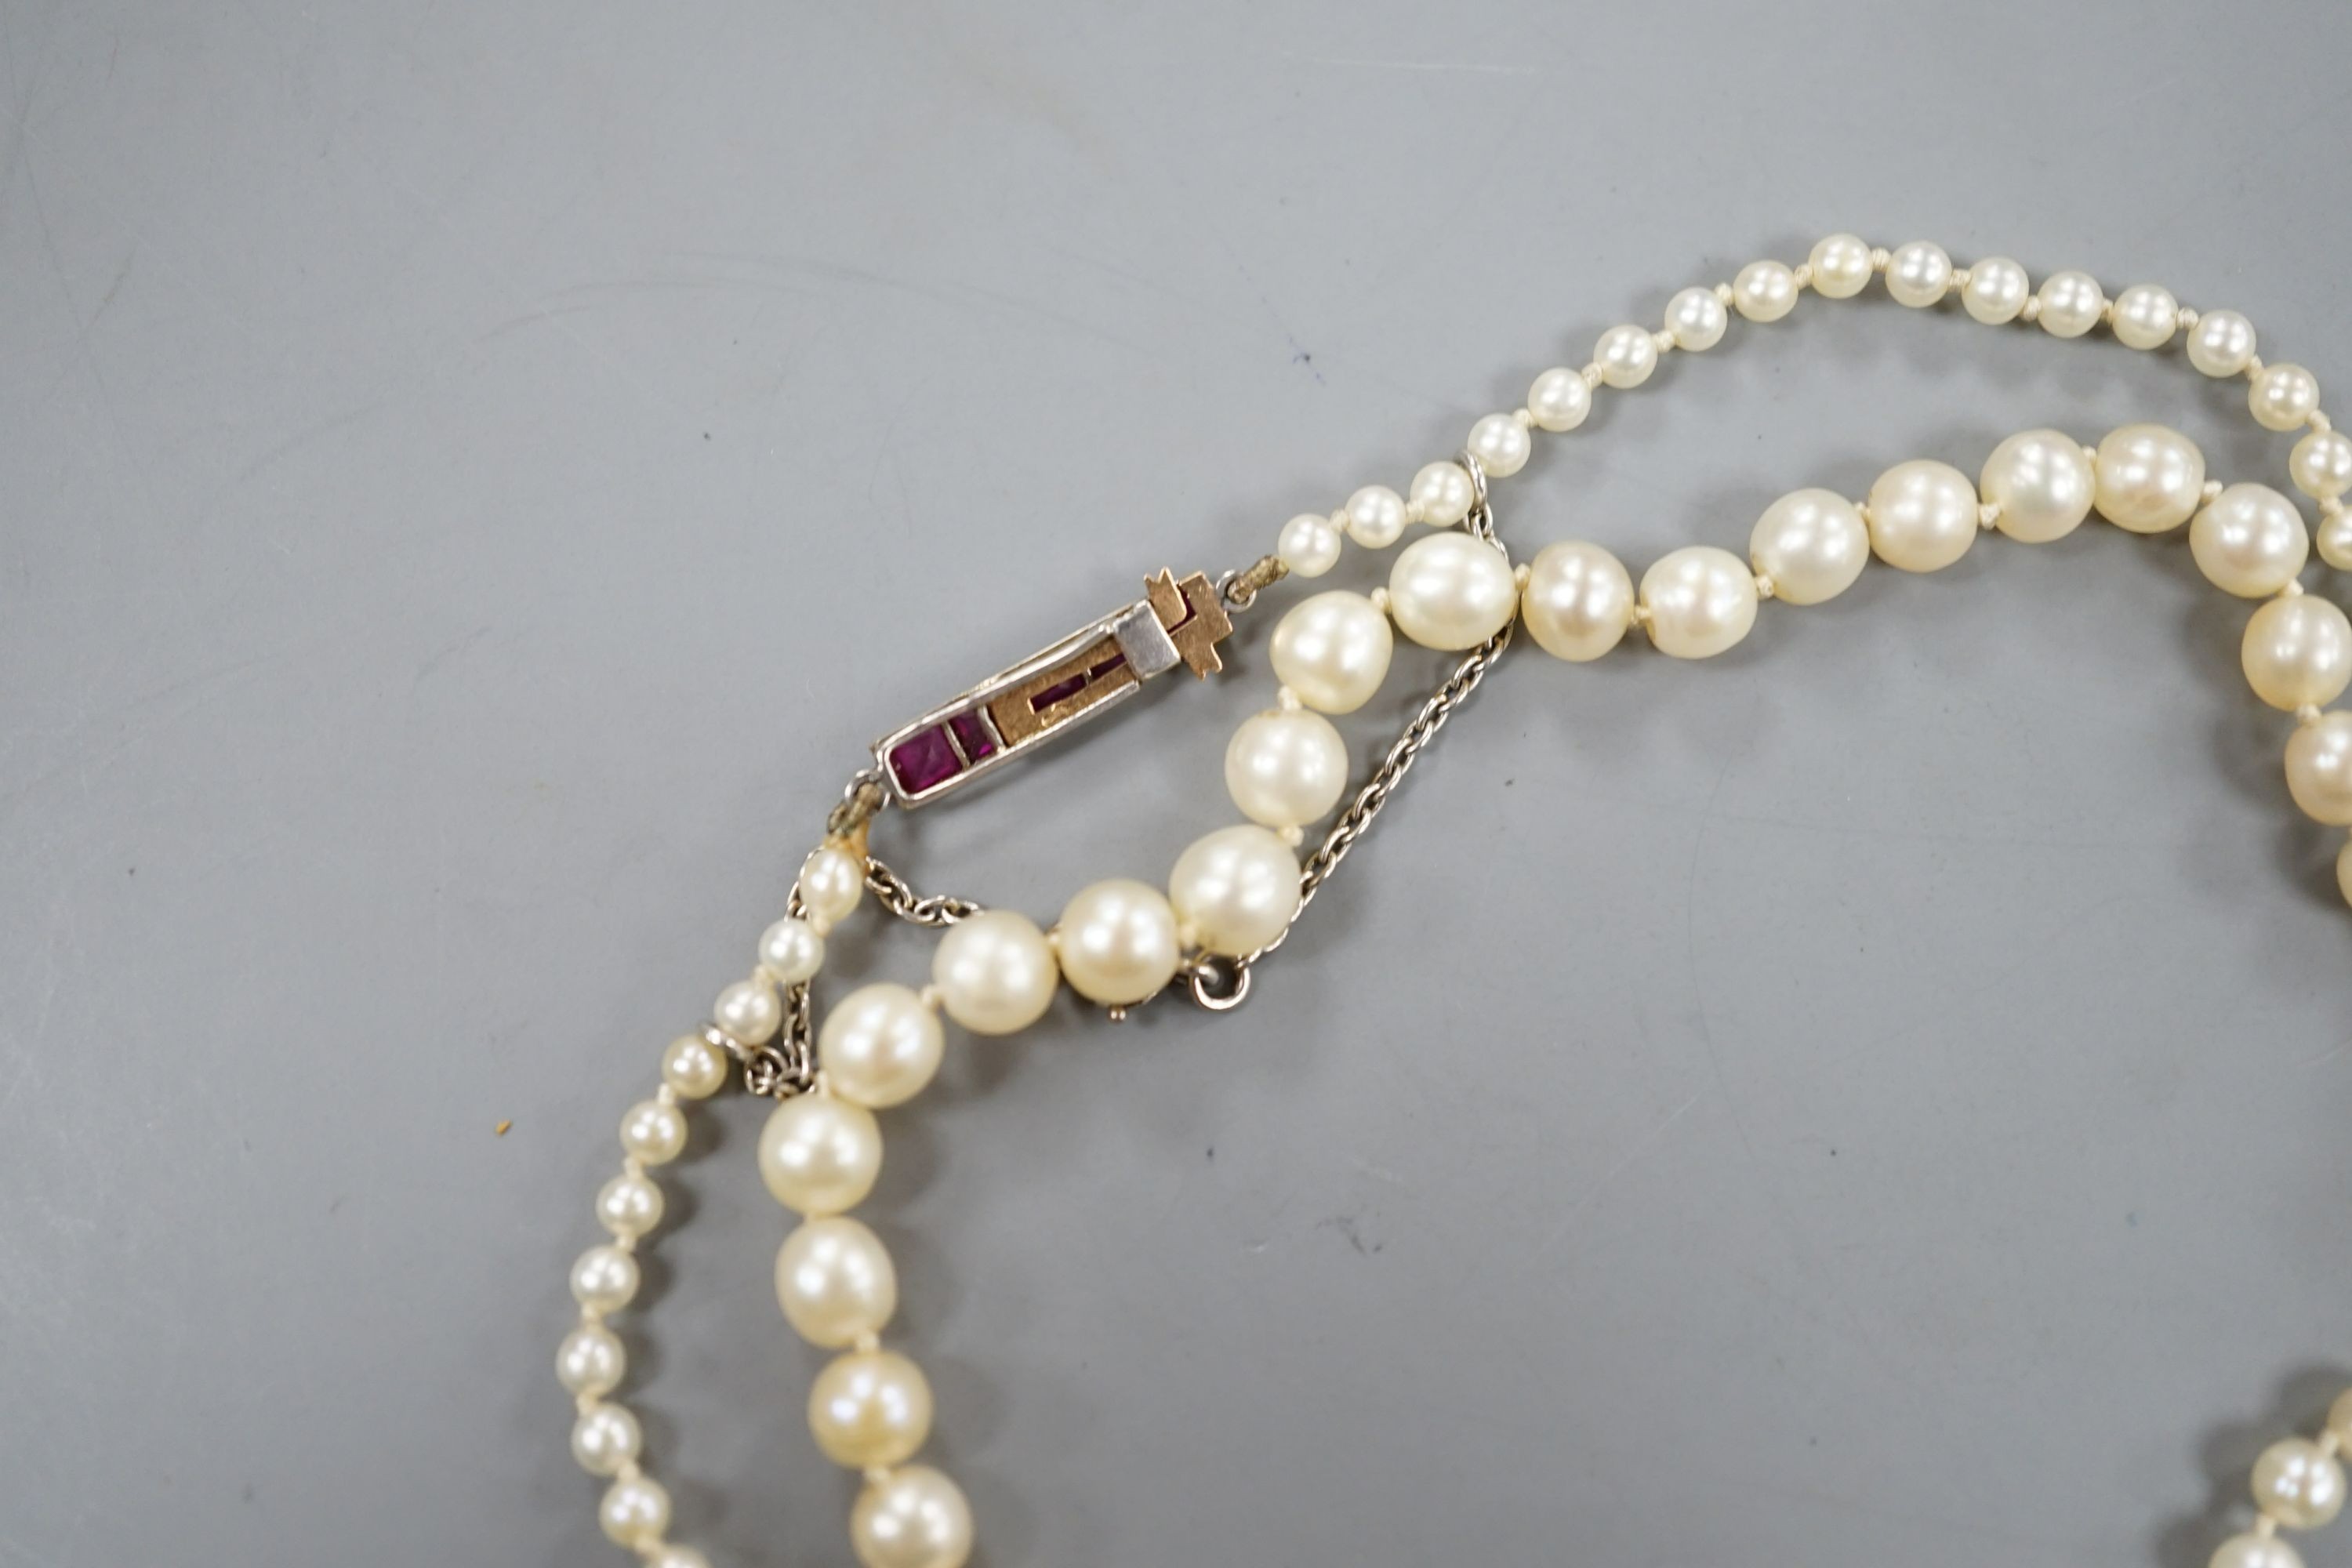 An early 20th century single strand graduated pearl necklace(pearls have not been tested as to whether or not they are natural), five stone ruby set yellow metal clasp, 44cm, gross weight 8.7 grams